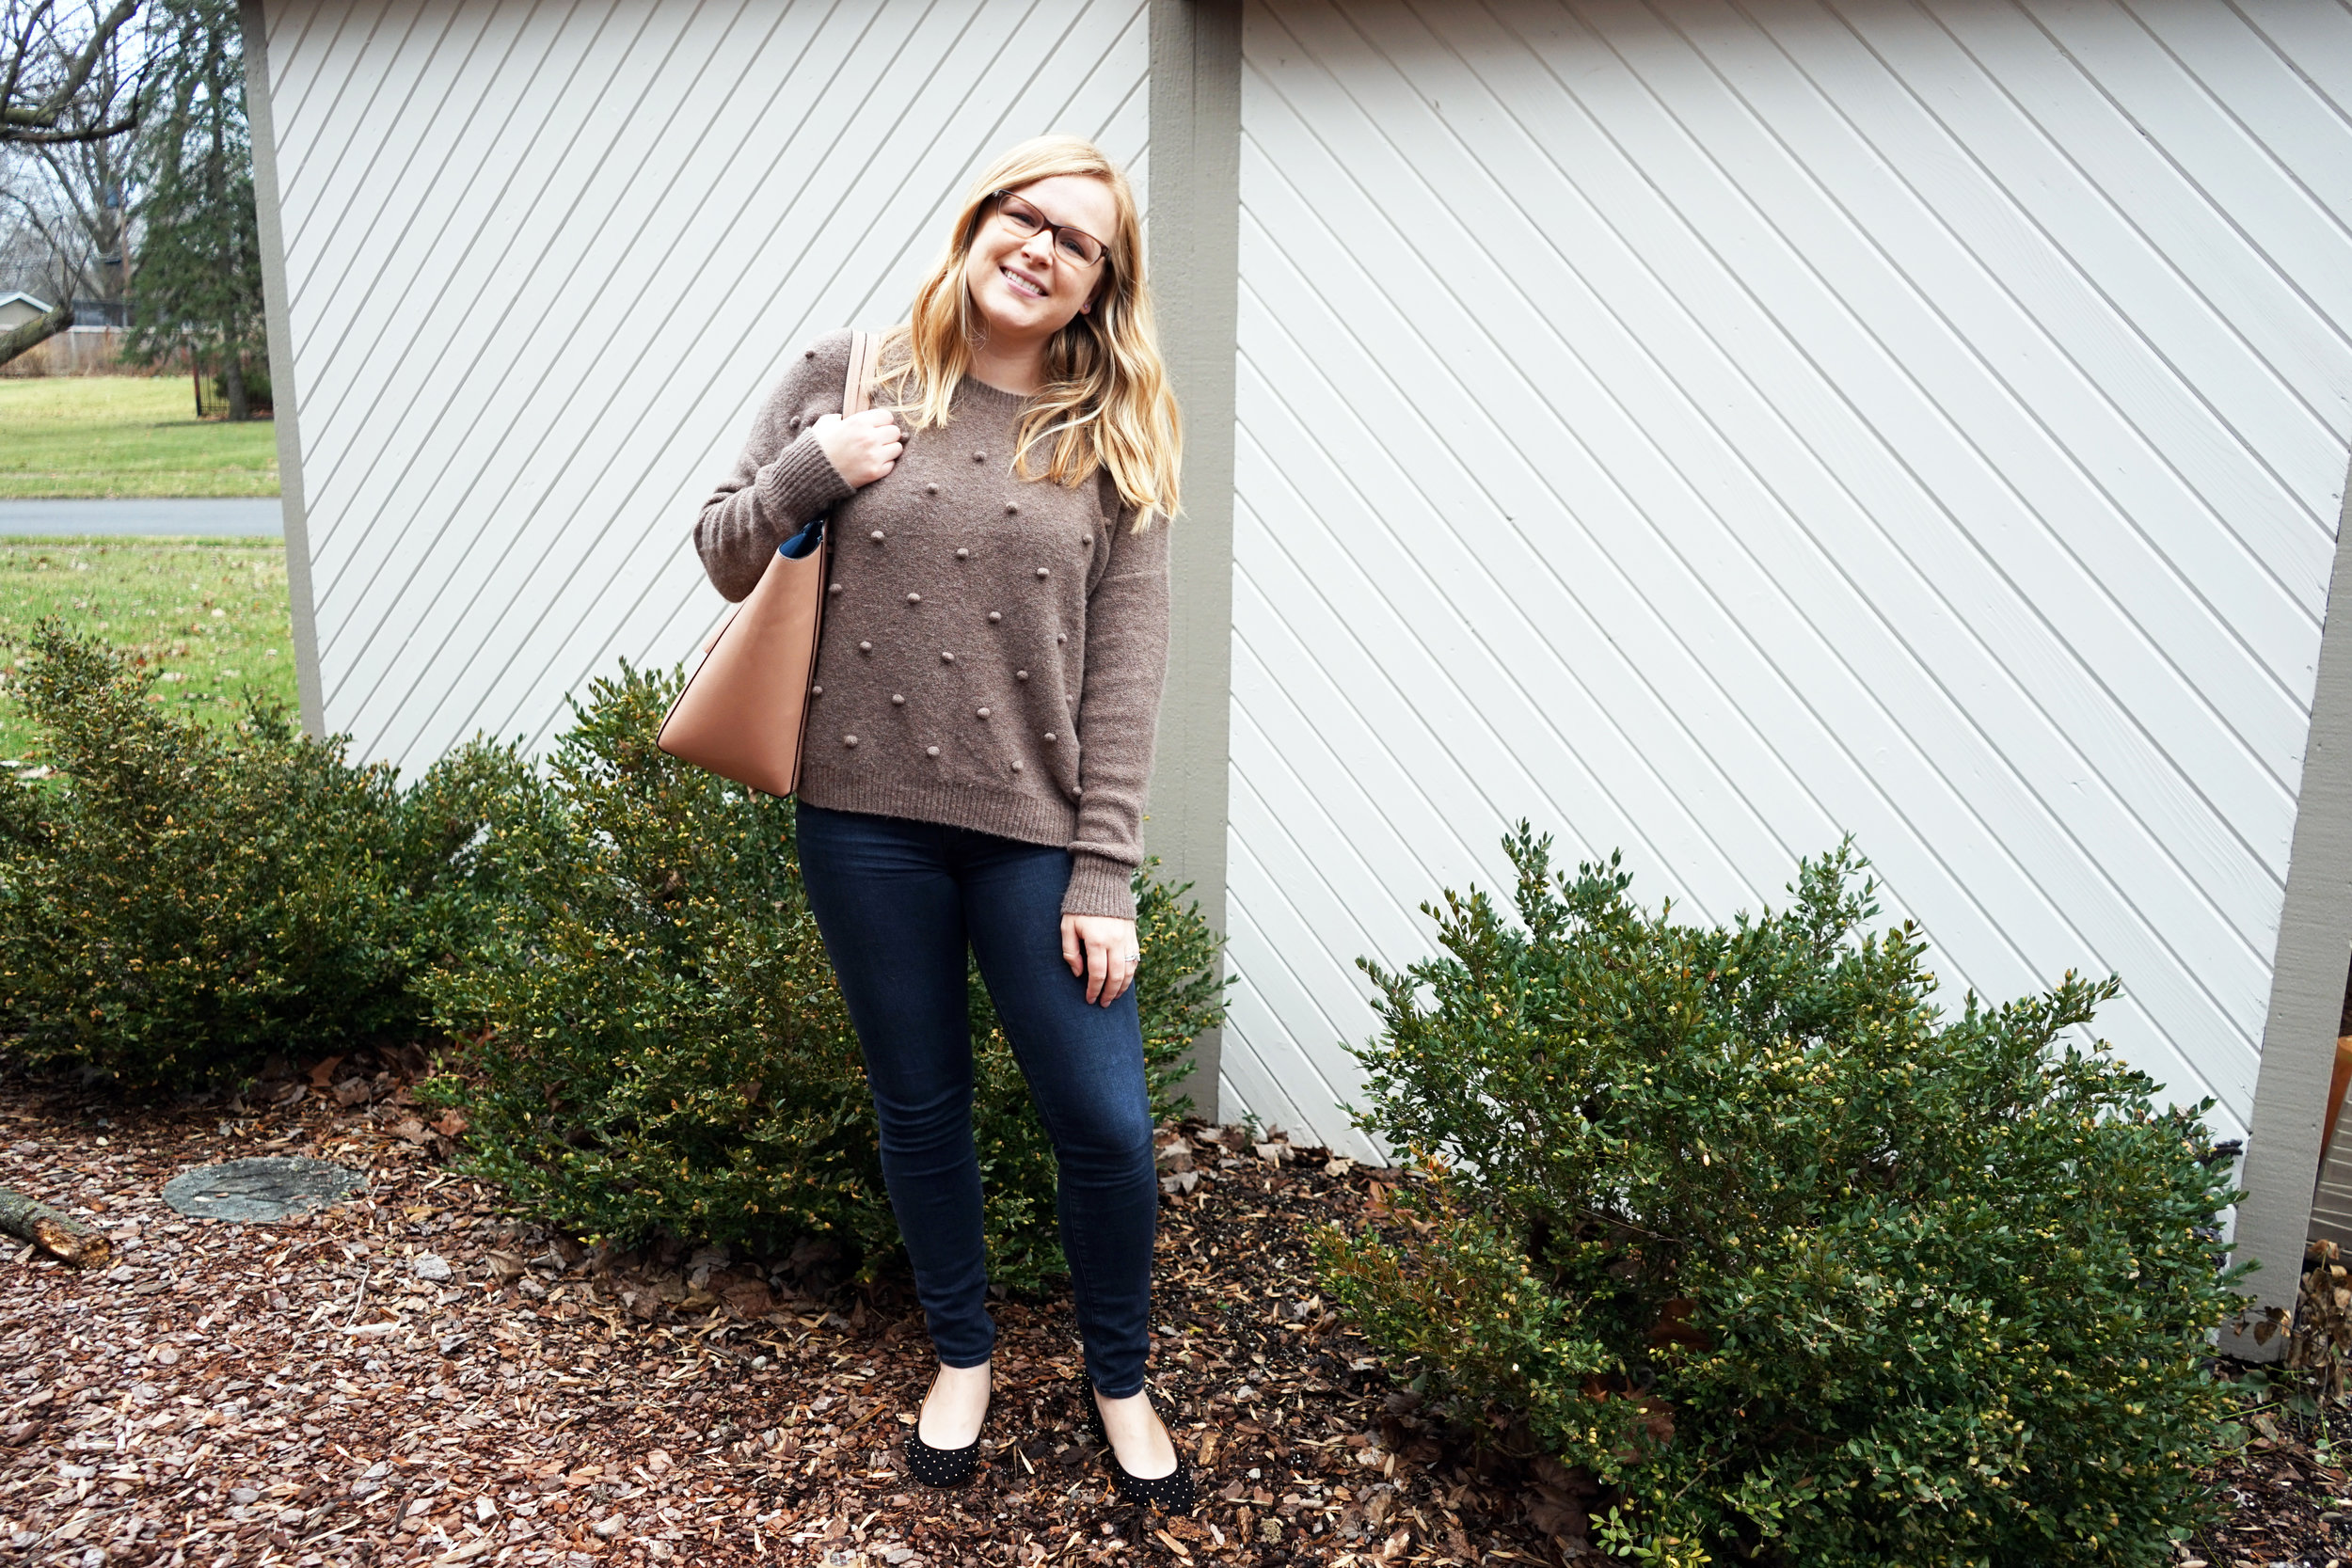 Maggie a la Mode - Madewell Bobble Pullover Sweater, Paige Denim Verdugo Skinny Jean Reed, Sezane Ashley Babies, Blue Les Copains tote